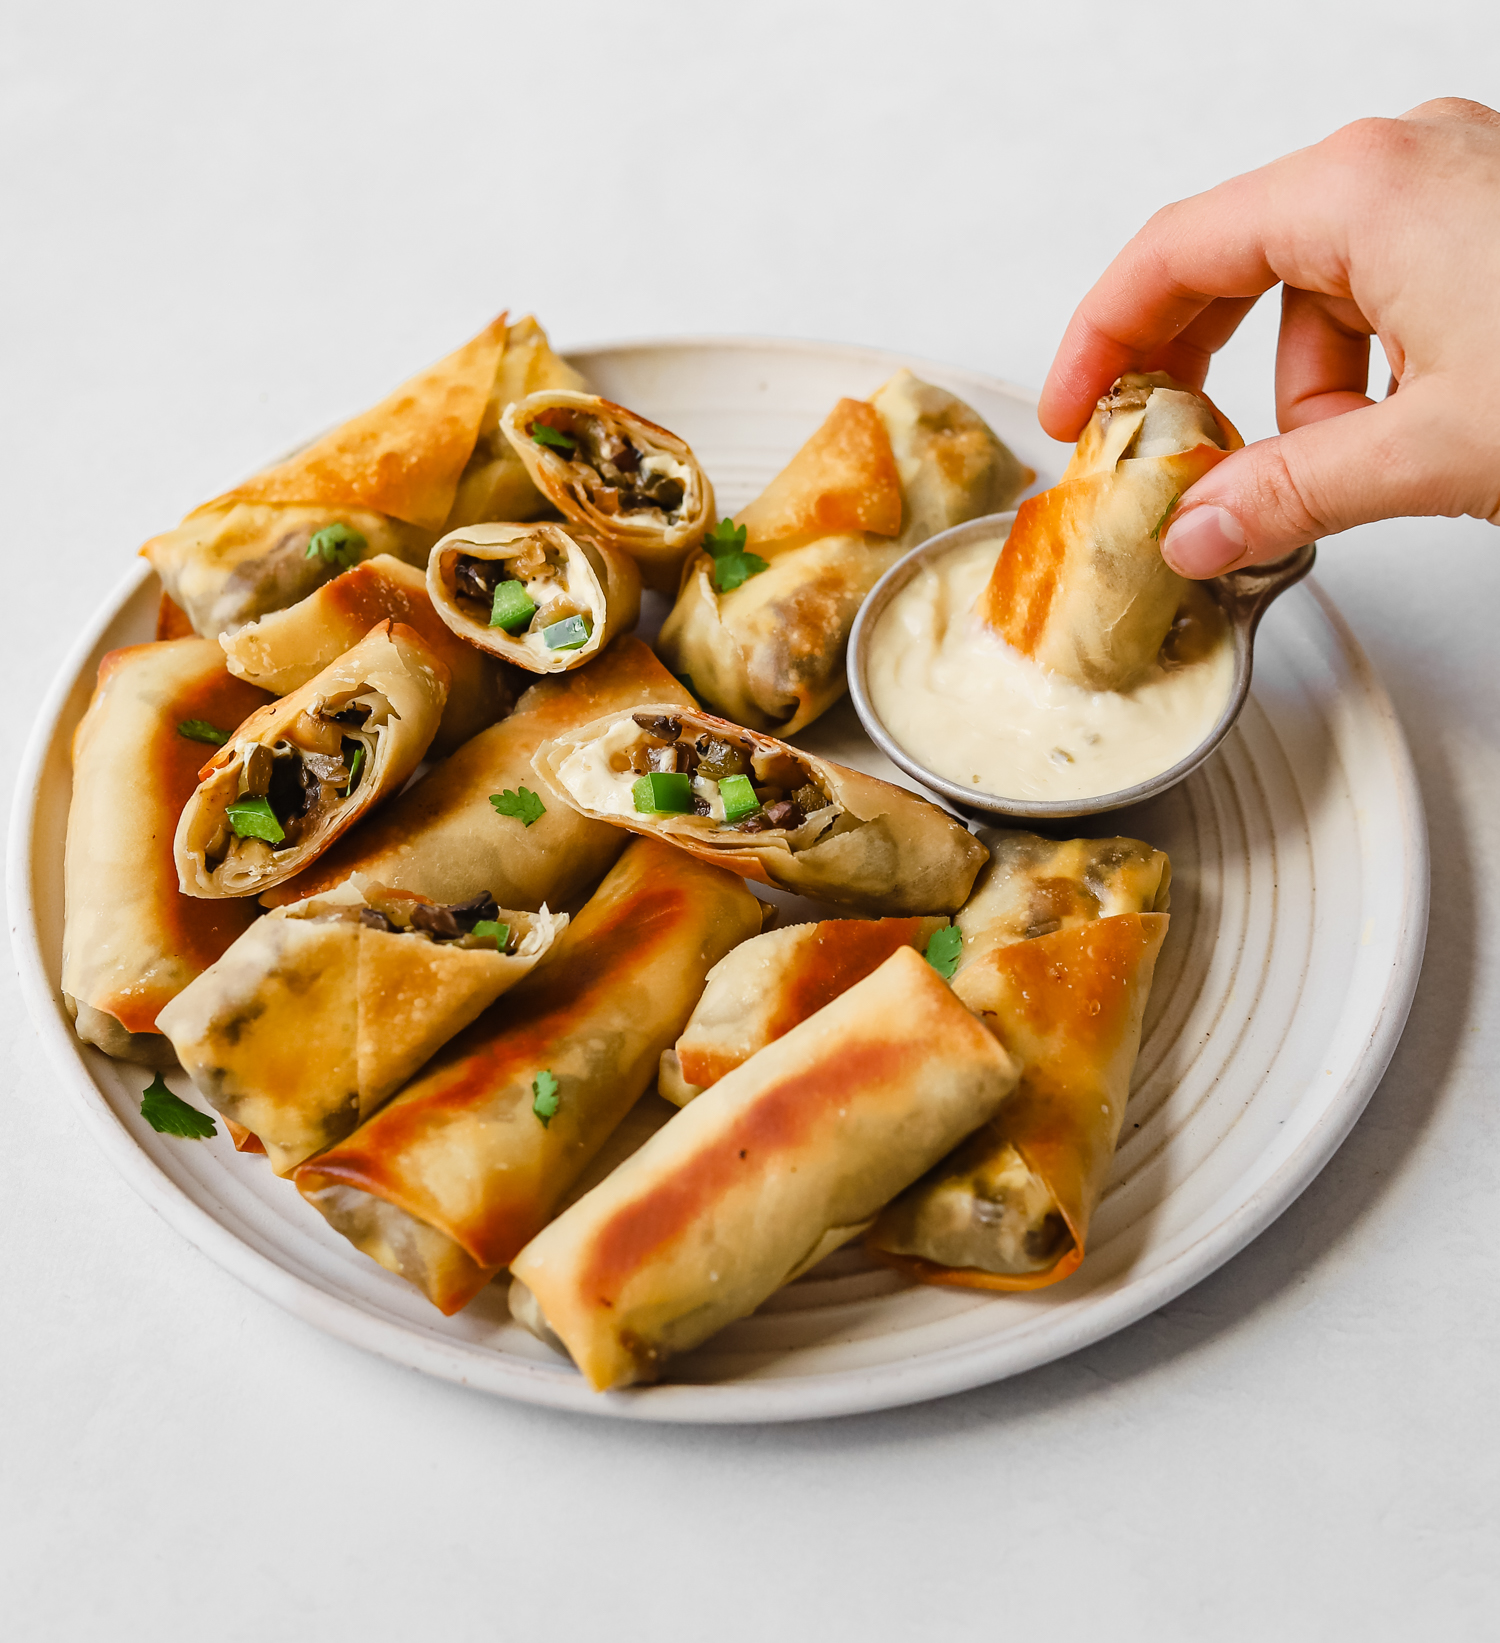 Dipping a mushroom philly cheesesteak egg roll into vegan cheese dipping sauce